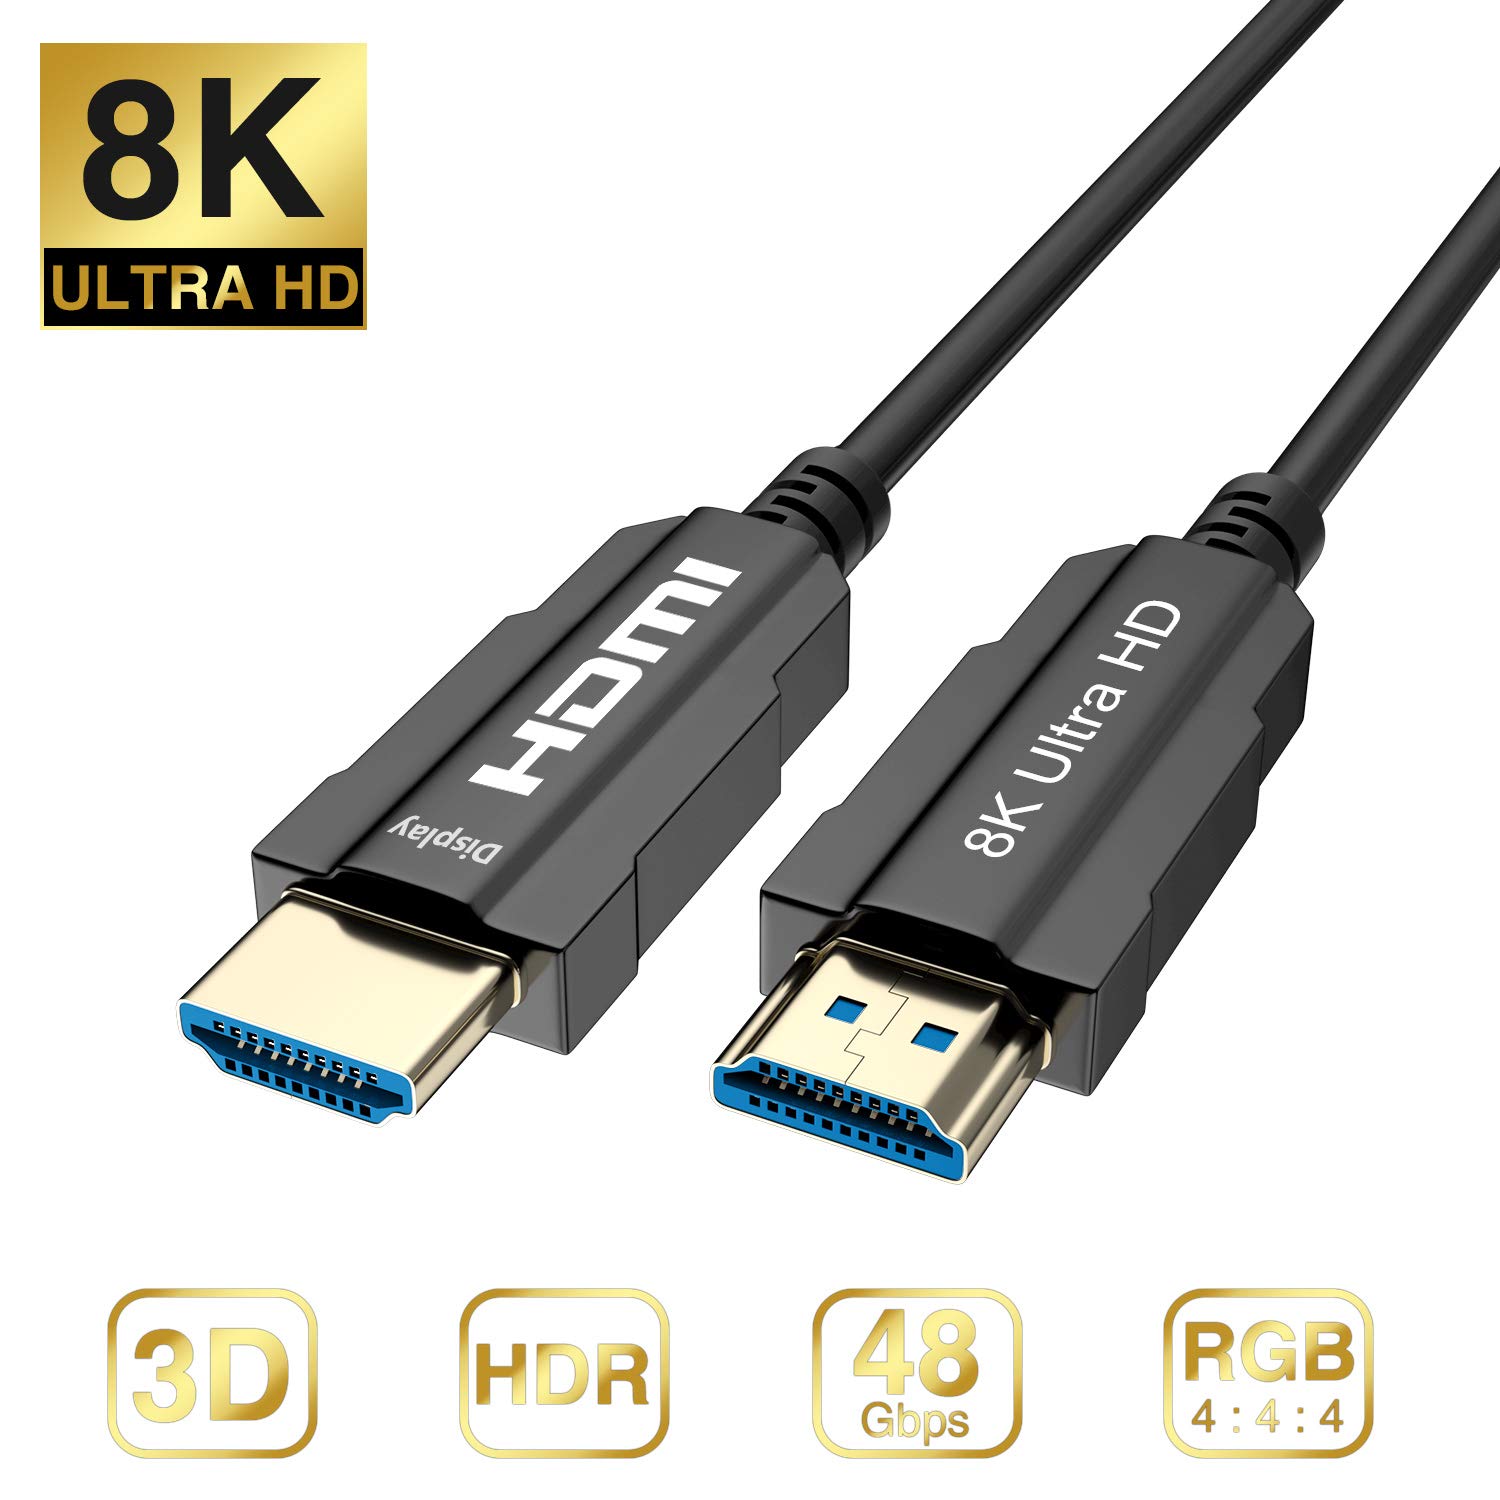 CABLEDECONN 8K HDMI Optic Cable Real UHD HDR 8K 48Gbps,8K@60Hz 4K@120Hz HDMI Fiber 20m 65ft Support 3D HDCP2.2 HDMI Cable for PS4 SetTop Box HDTVs Projectors T0207